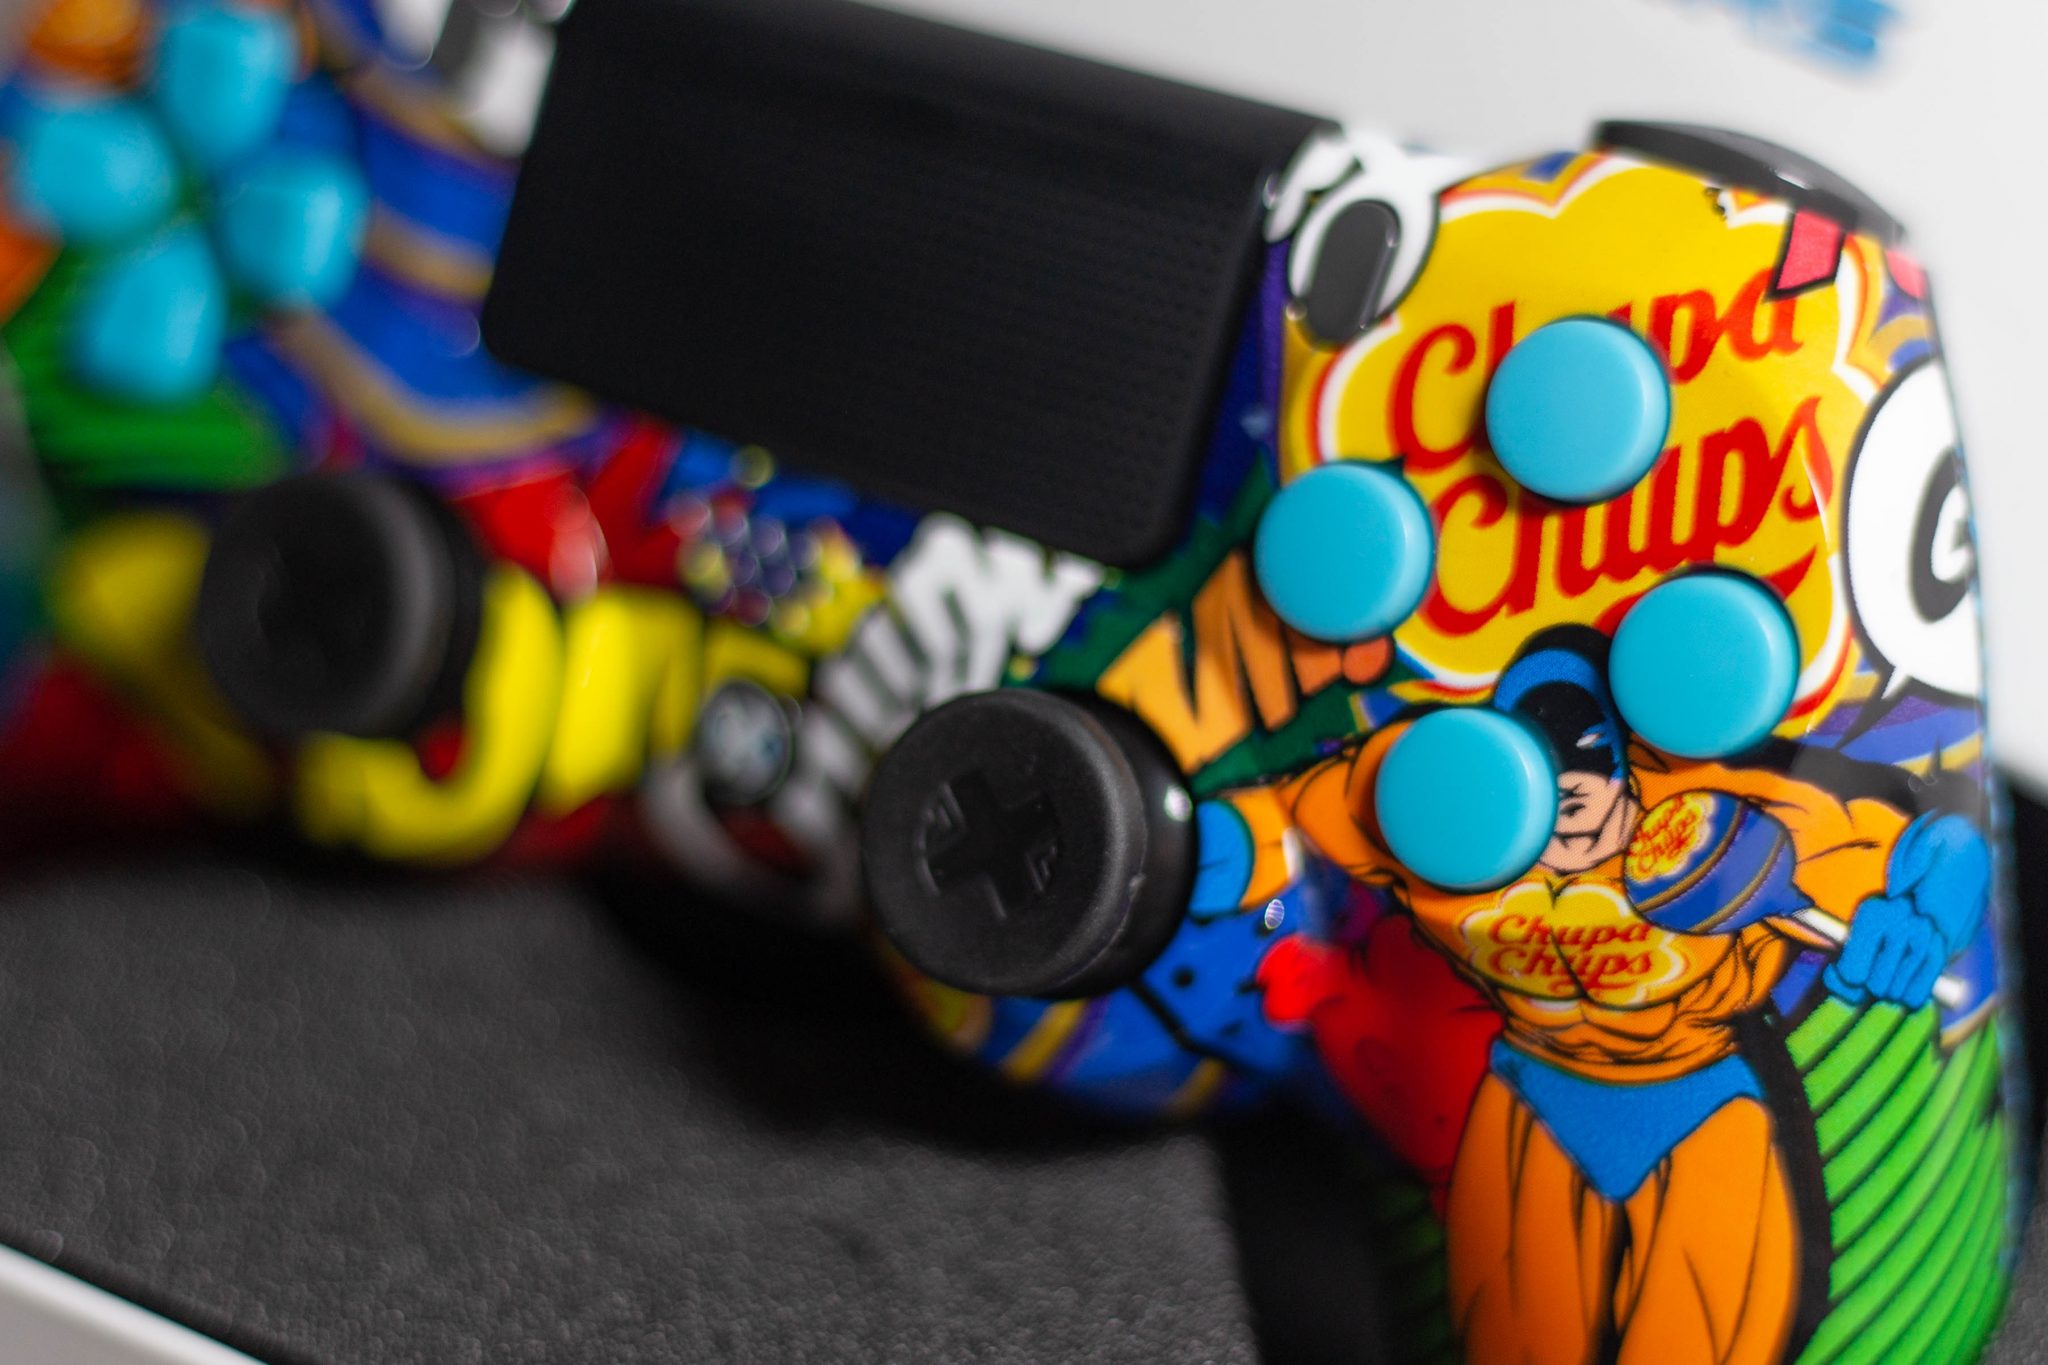 XControllers and the Spanish YouTube Gaming stars have designed an amazing Chupa Chups controller image